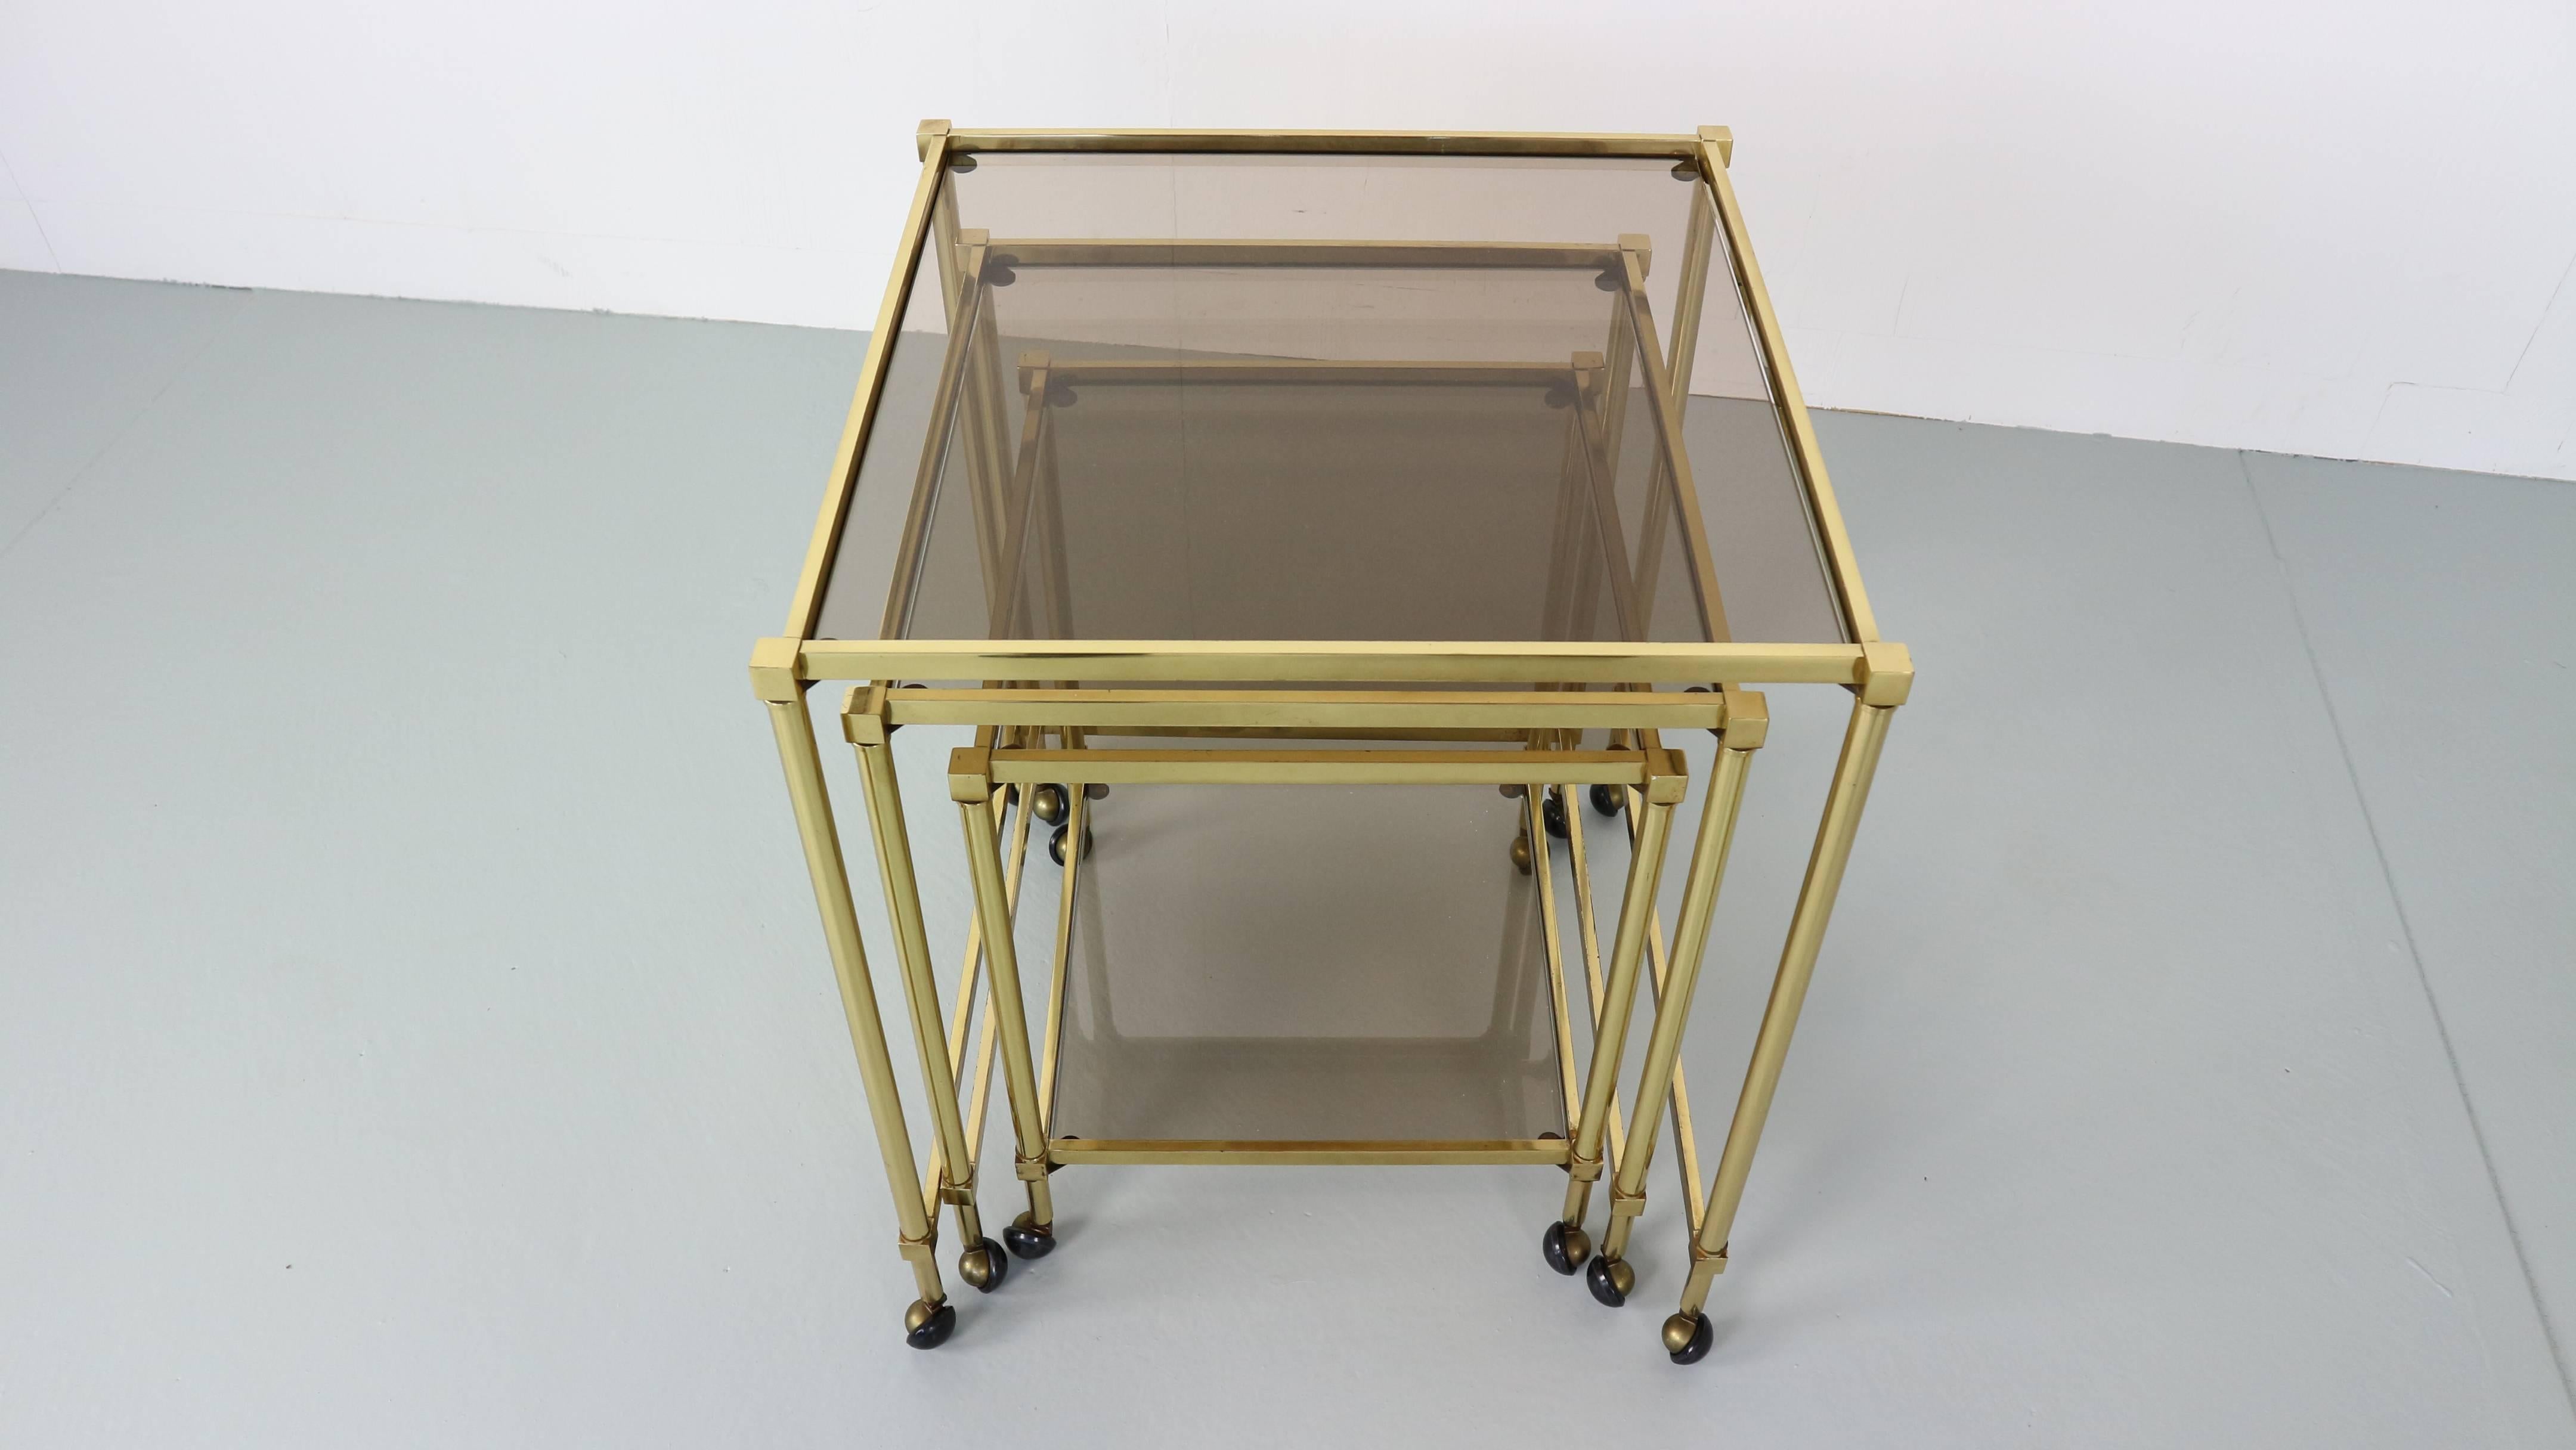 This set of three nesting tables are made from brass and glass and feature wheels. The tables can be arranged separately or can be slotted together to save space.